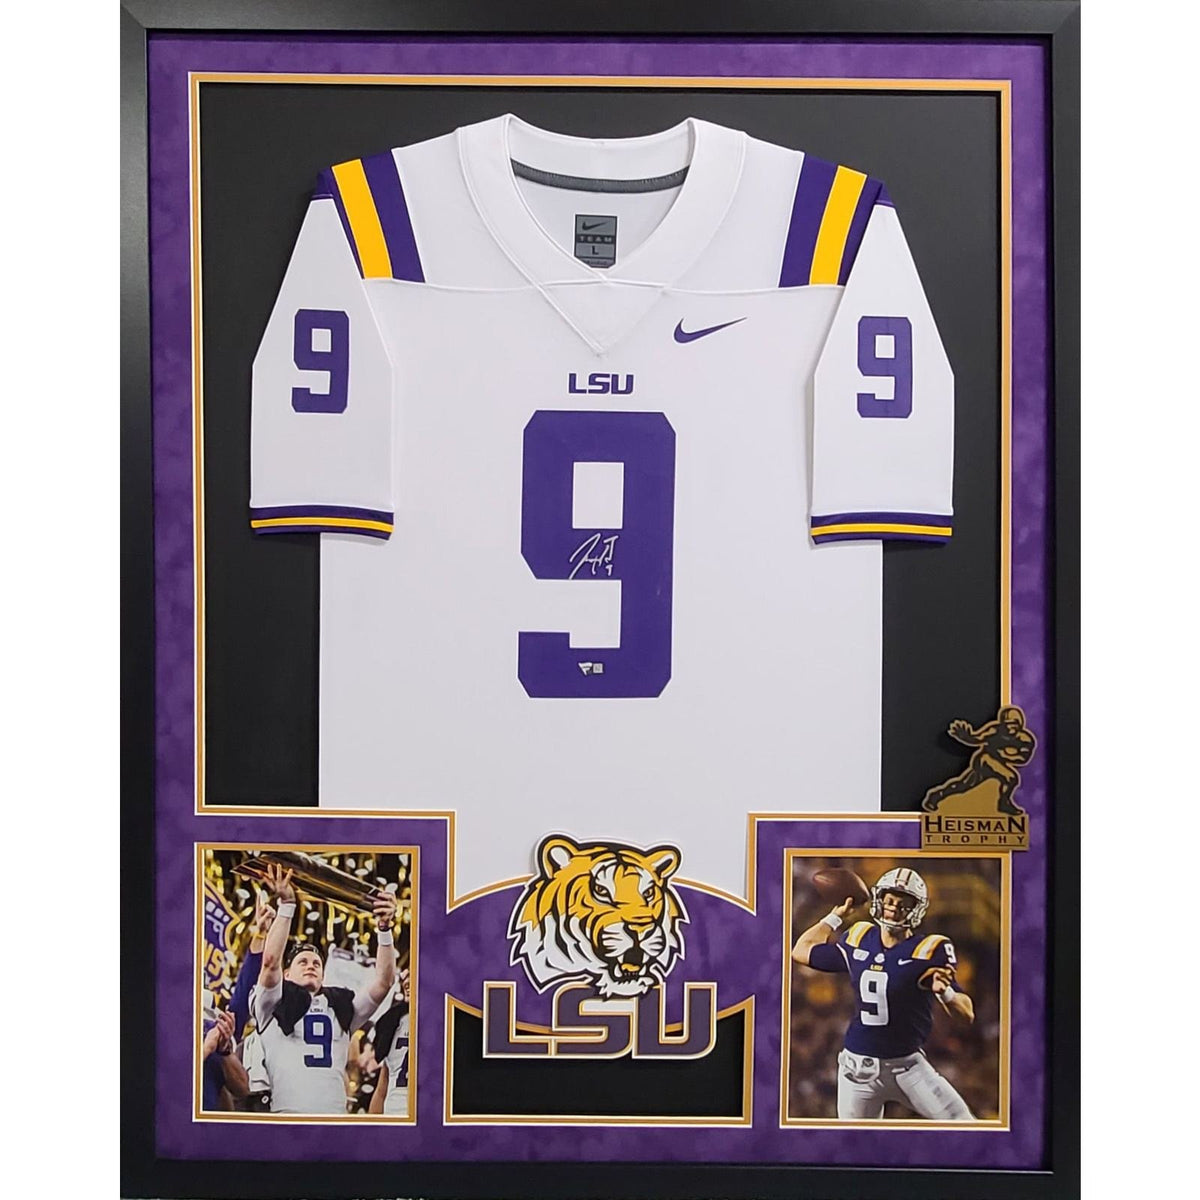 Joe Burrow LSU Tigers Autographed White Nike Game Jersey - Signed on Front